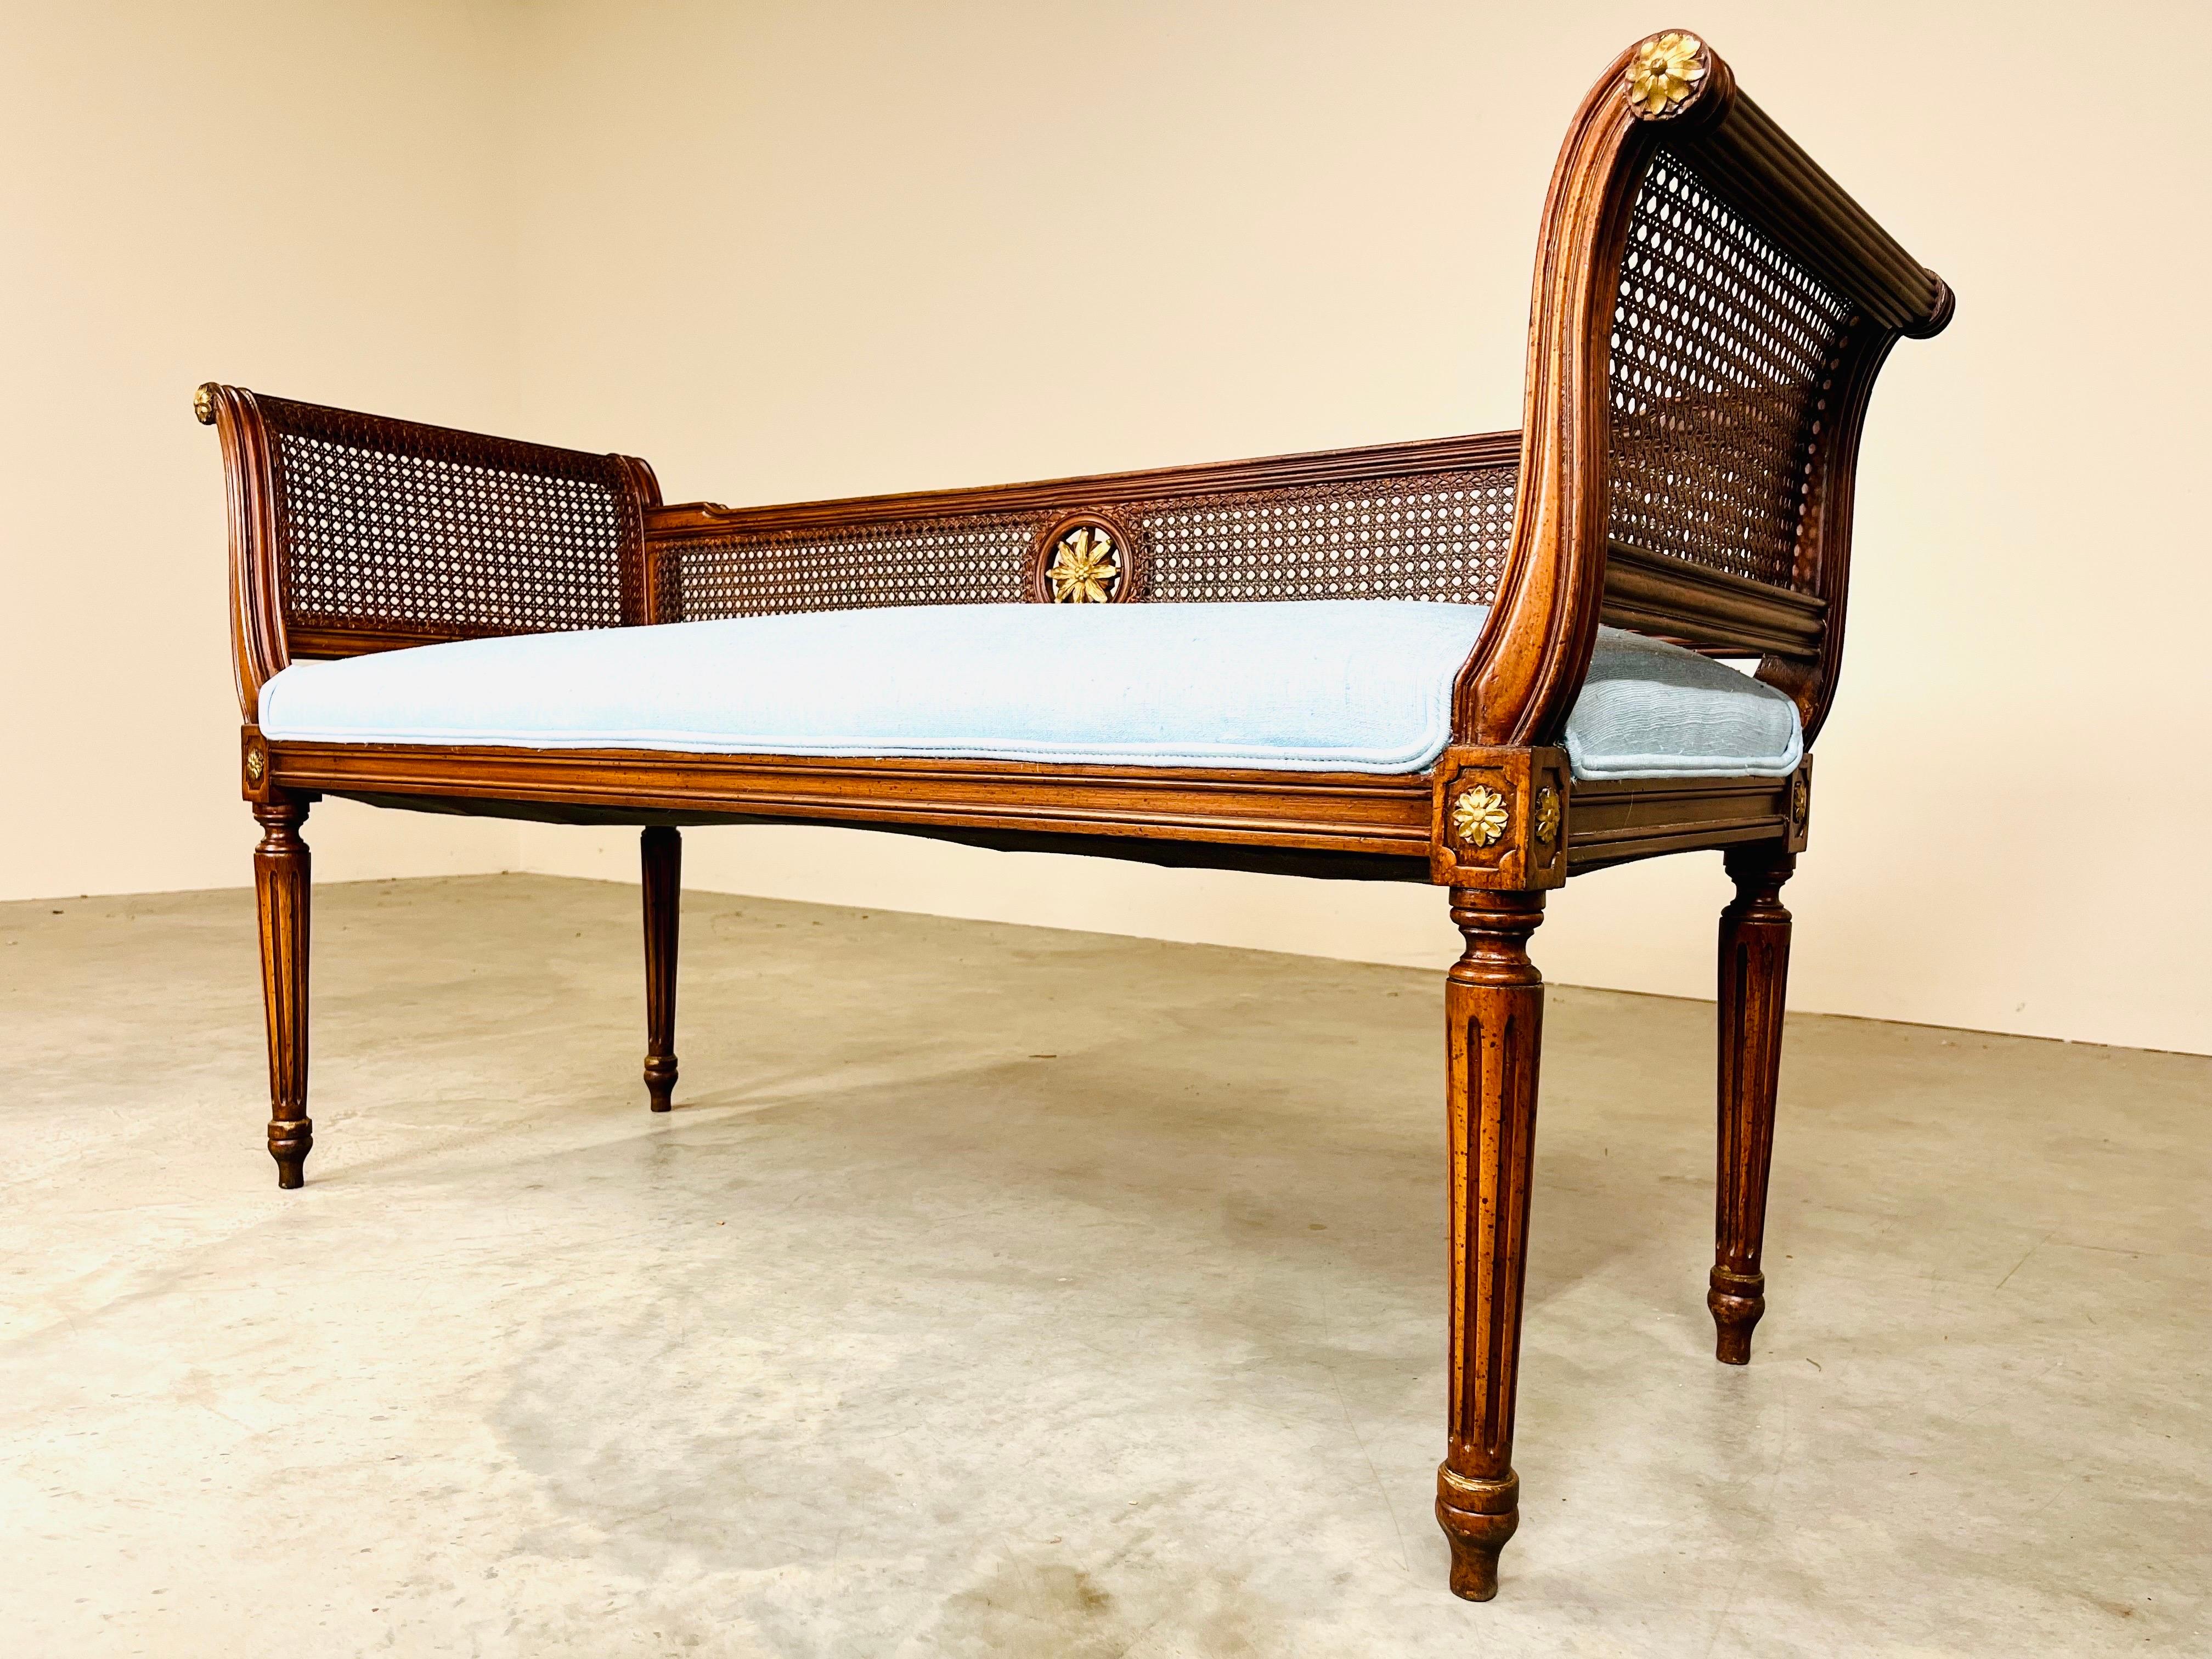 Louis XVI Style Caned Scroll Arm Window Bench with Gold Gilt Embellishments  5